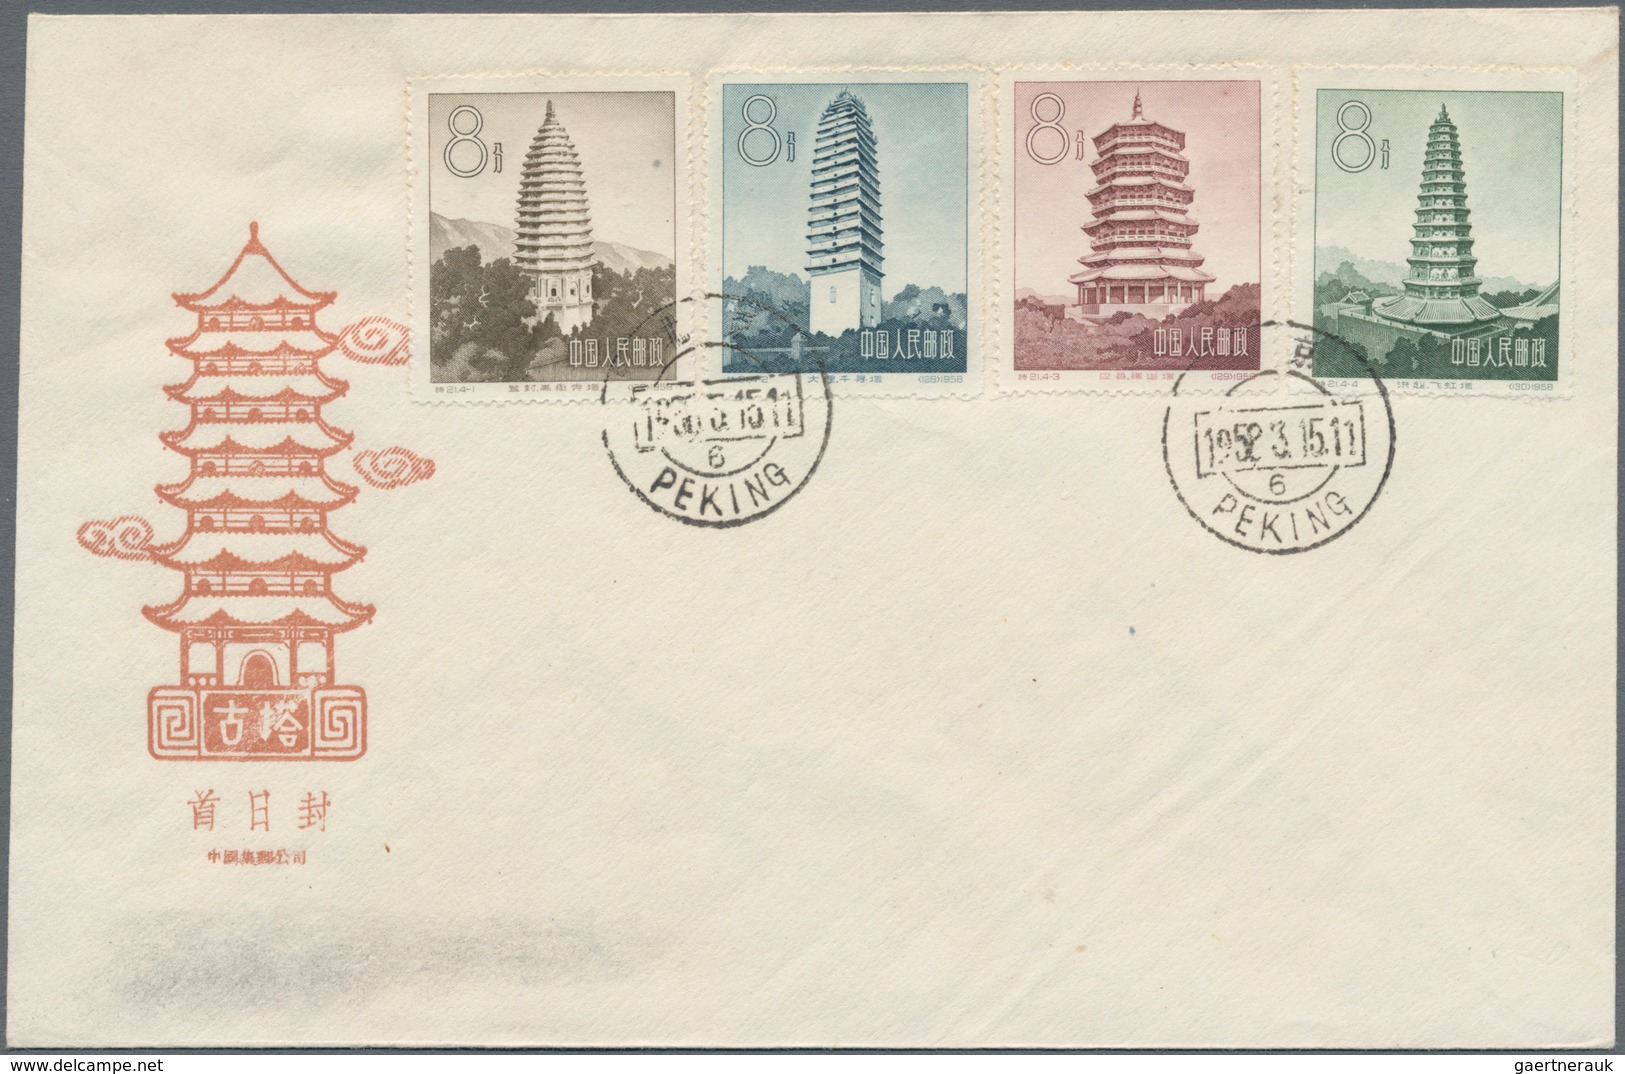 China - Volksrepublik: 1957/58, 5 FDCs bearing Michel 349/68 (C44, S19, S20, C45, S21), tied by firs